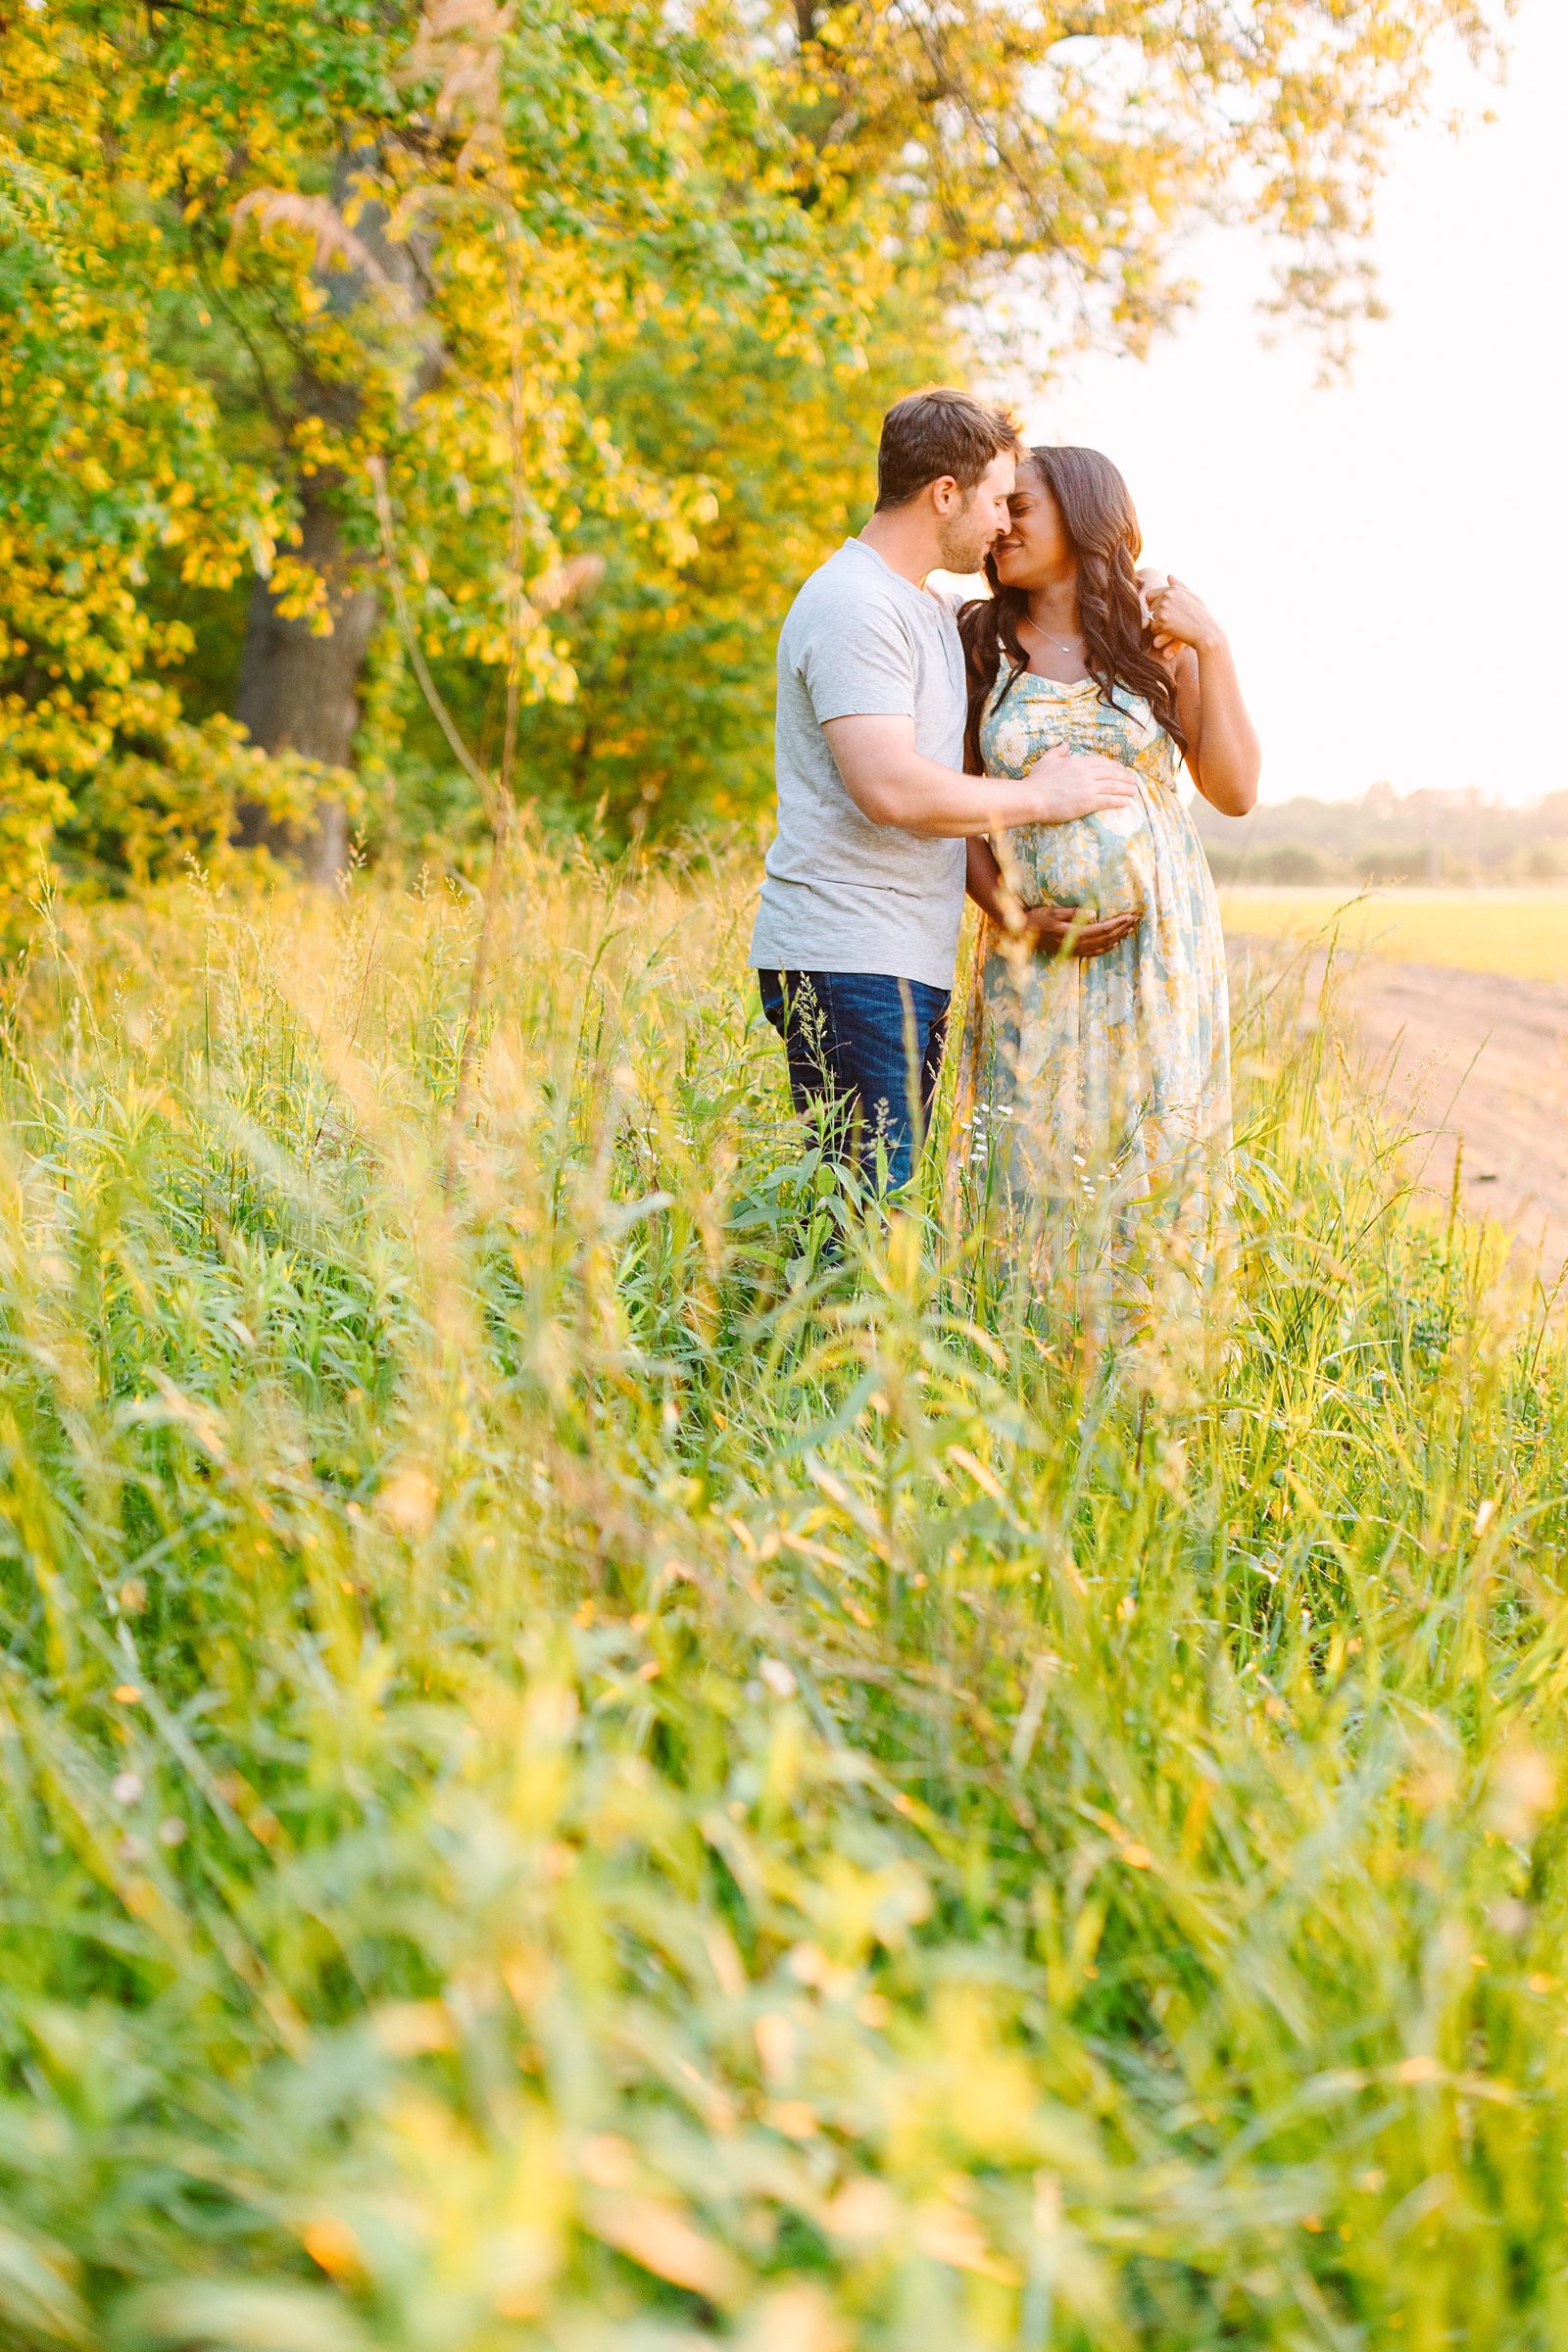 A Dreamy Rockport Indiana Maternity Session | Bret and Brandie Photography20.jpg